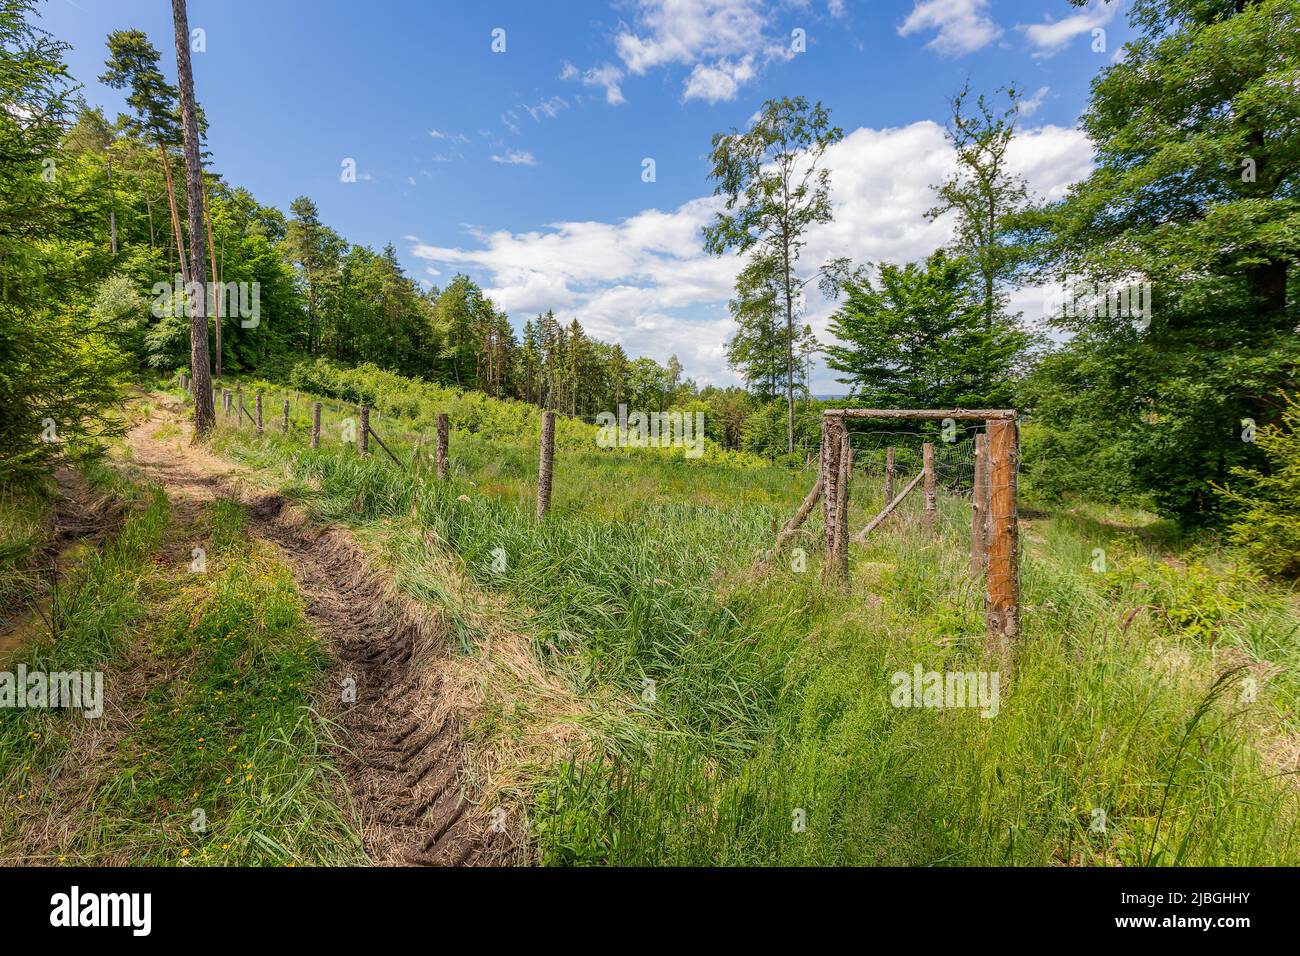 A view of forest landscape, a tractor track, fresh green grass and an enclosure for young trees. Sunny spring day with blue sky and white clouds. Stock Photo